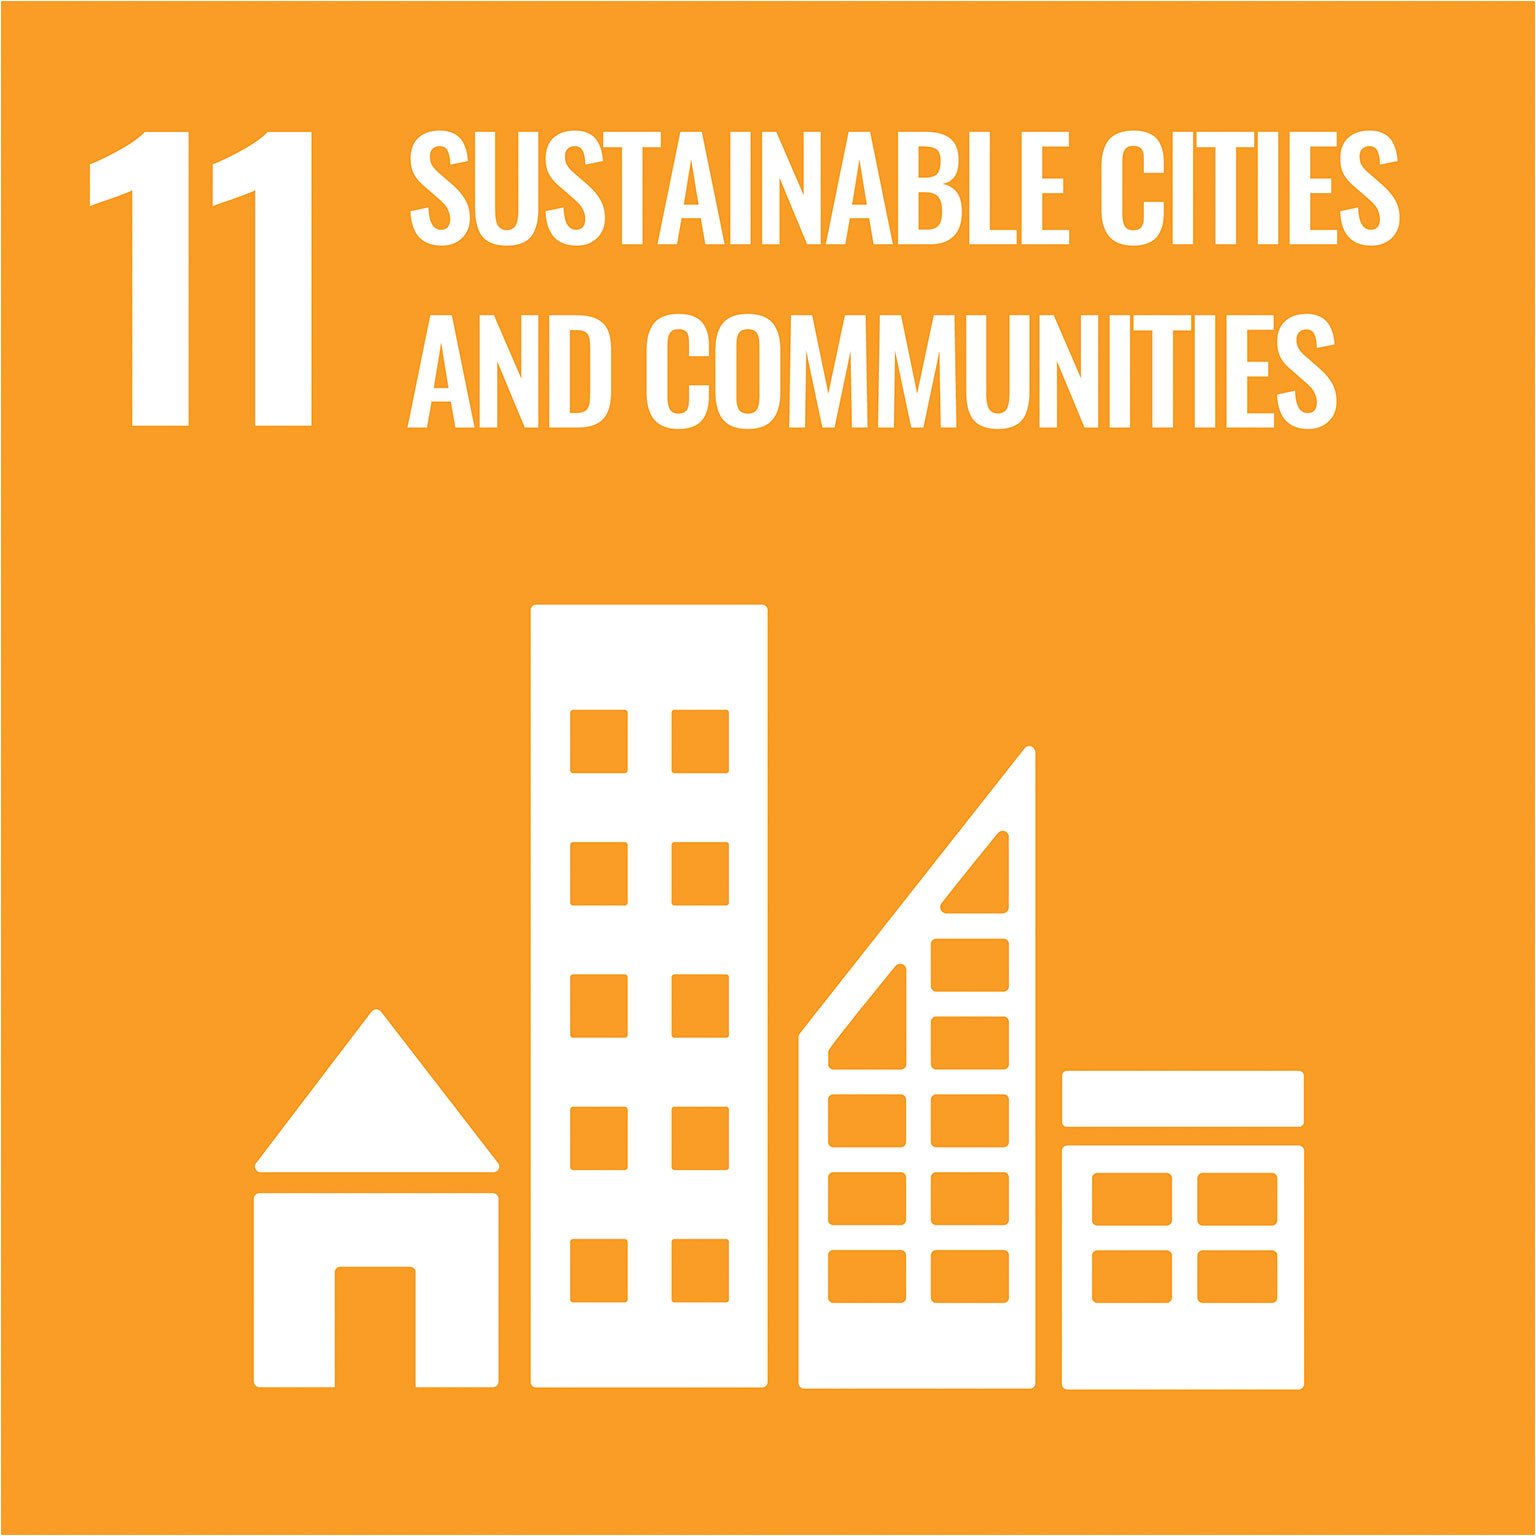 sustainable development goals: sustainable cities and communities